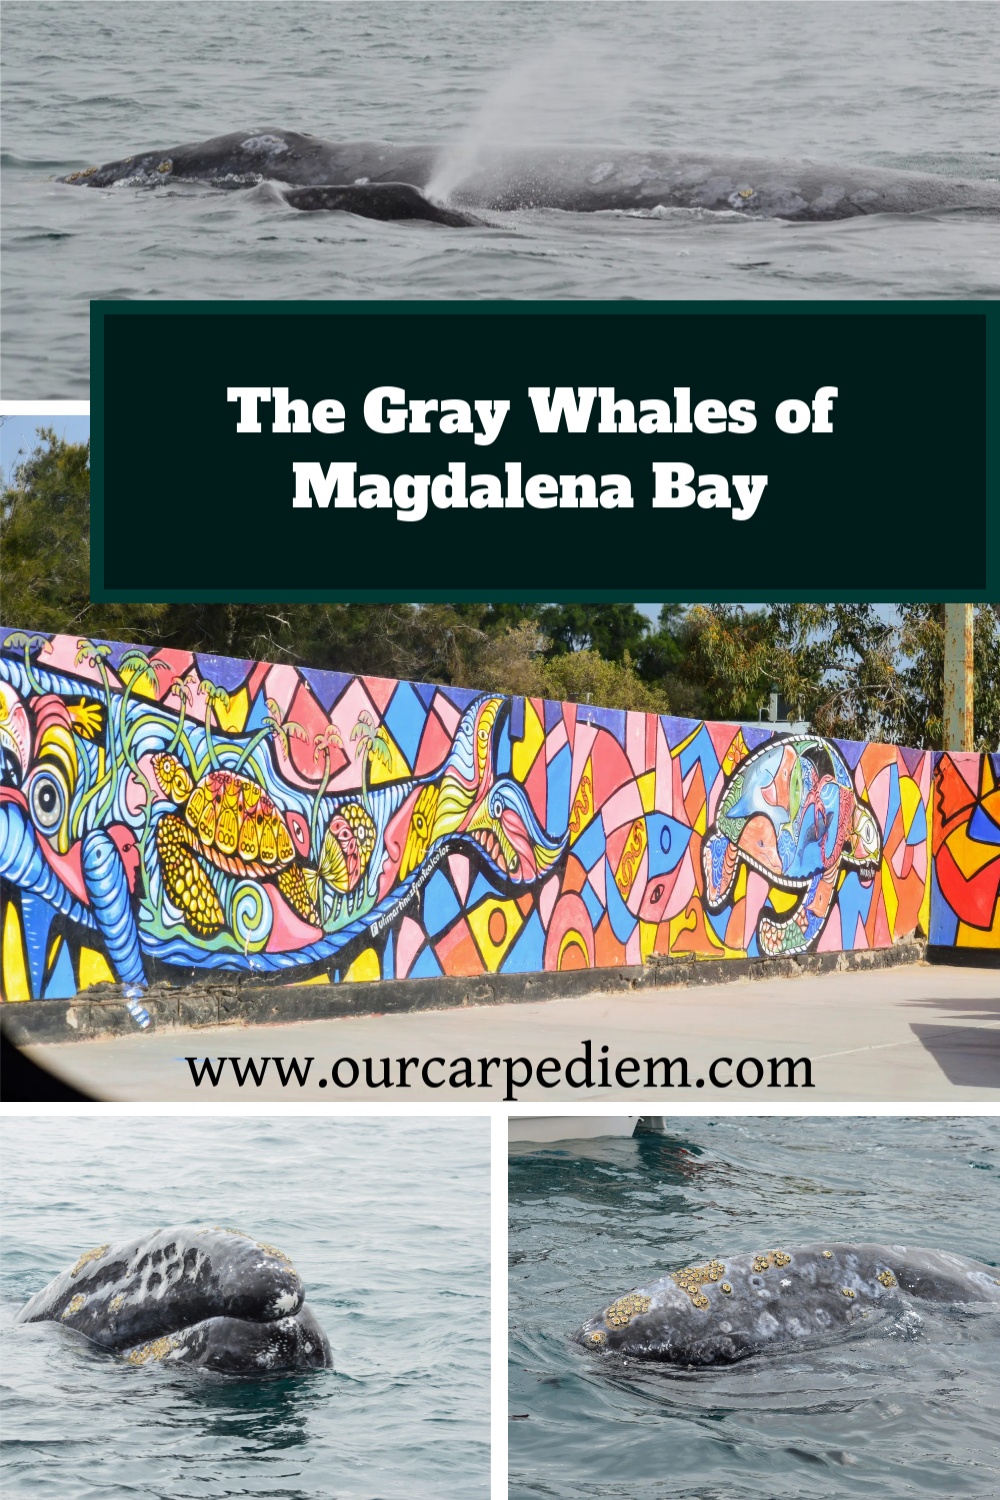 The grey whales of Magdalena Bay will rock you! Find out everything you need to know about these gentle giants and if you are lucky, touch a whale! If you love nature, you will really enjoy this article and find out about a unique type of whale watching #GreyWhales #ThingsToDo #WhaleWatching #MagdalenaBay #OurCarpeDiem #MexicoTravel